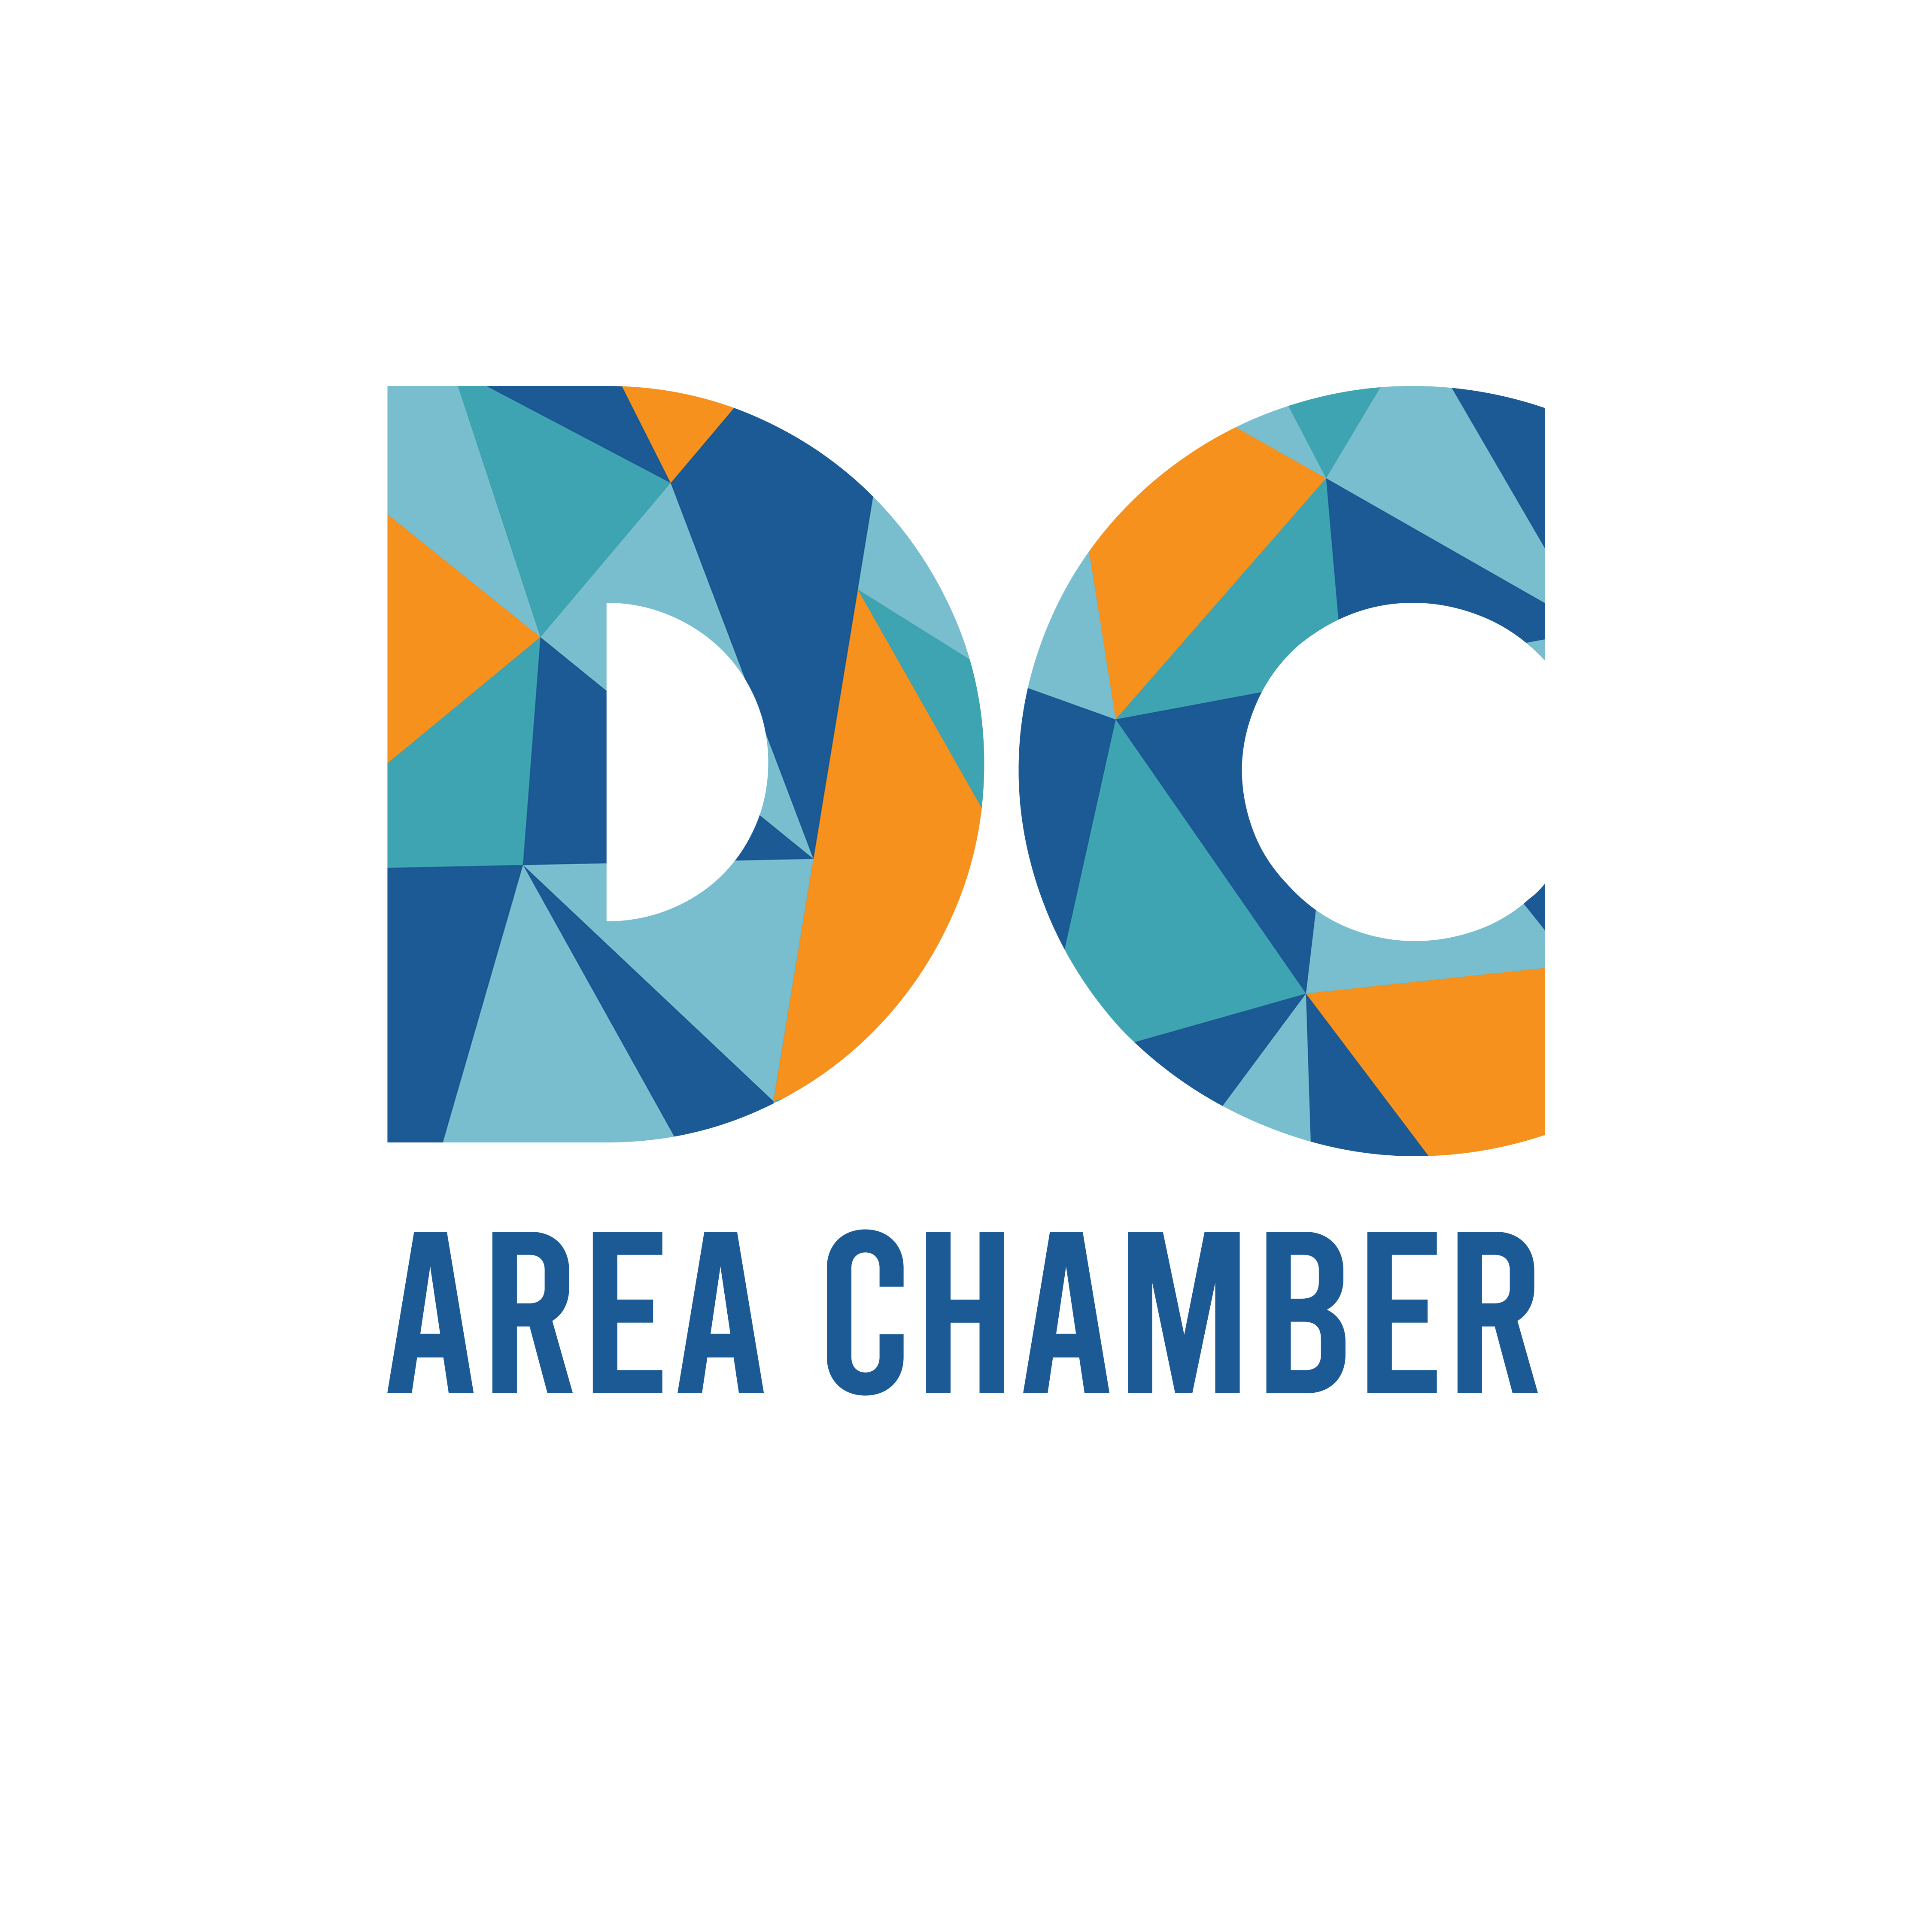 Dodge City Area Chamber of Commerce